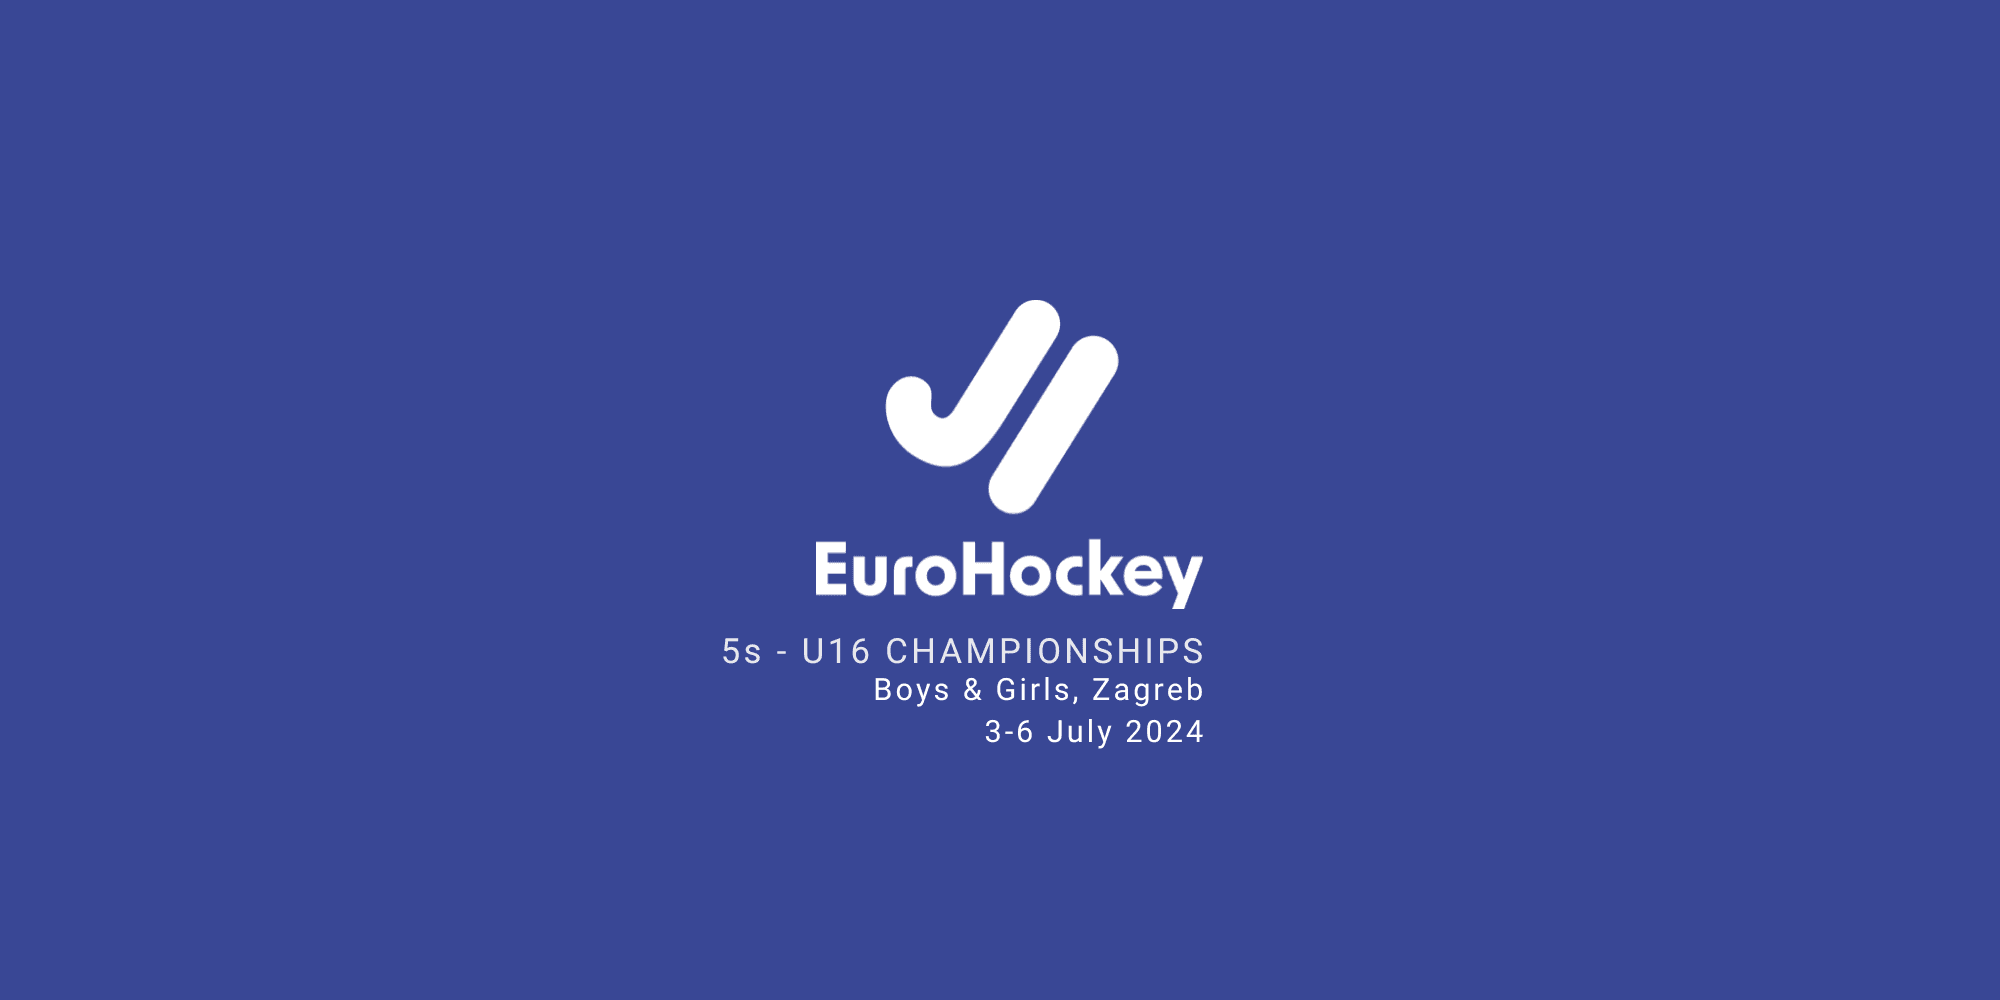 Zagreb welcomes 16 teams for EuroHockey 5s Under-16 championship tournaments